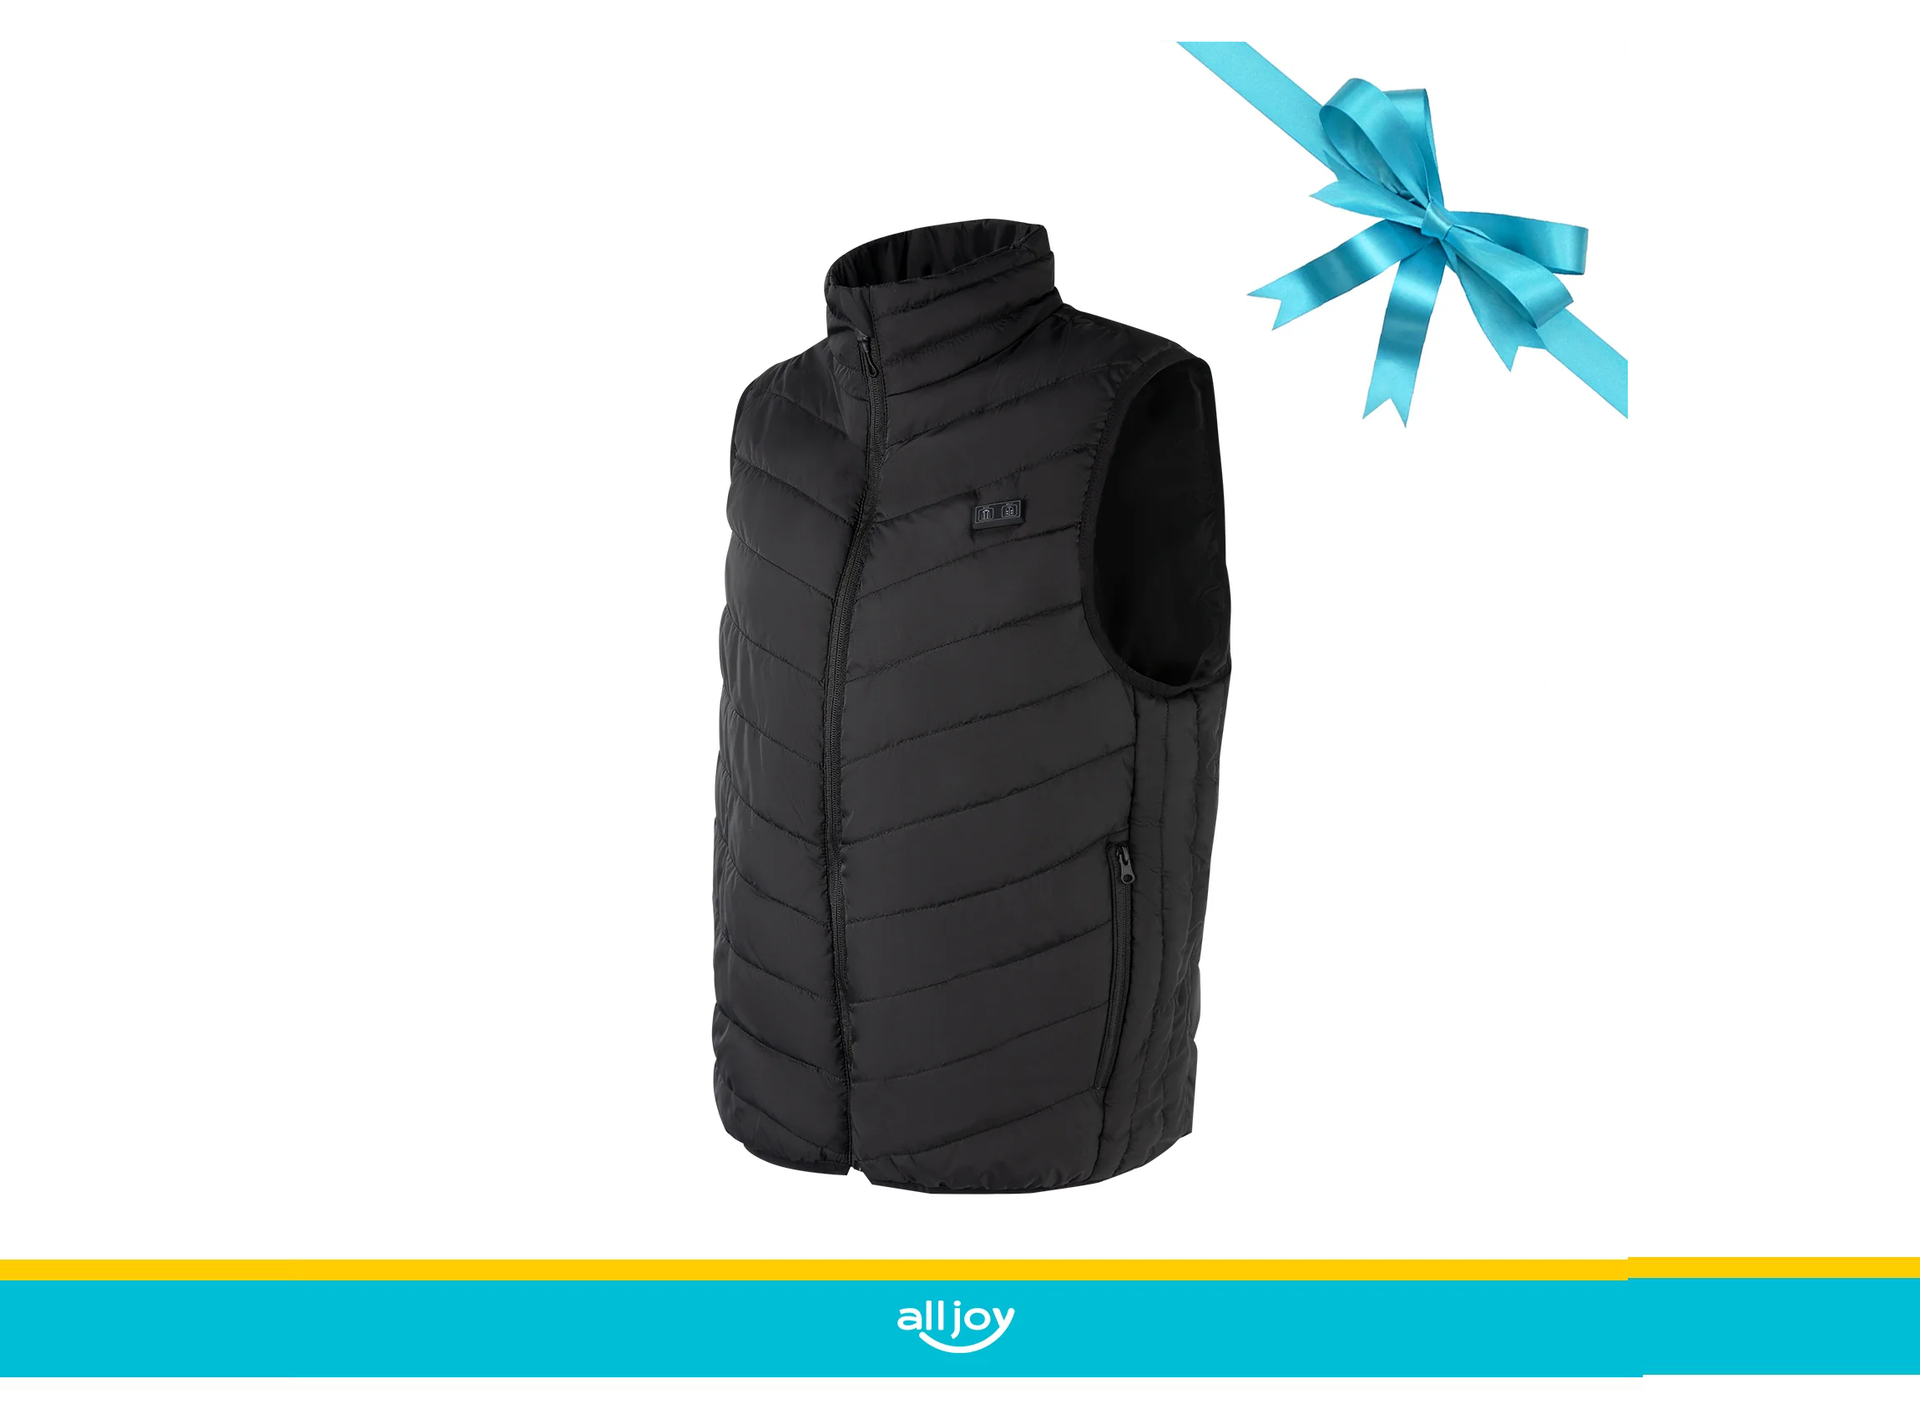 Ask Alljoy: Will Heated Vest Help Me Stay Warm This Winter?